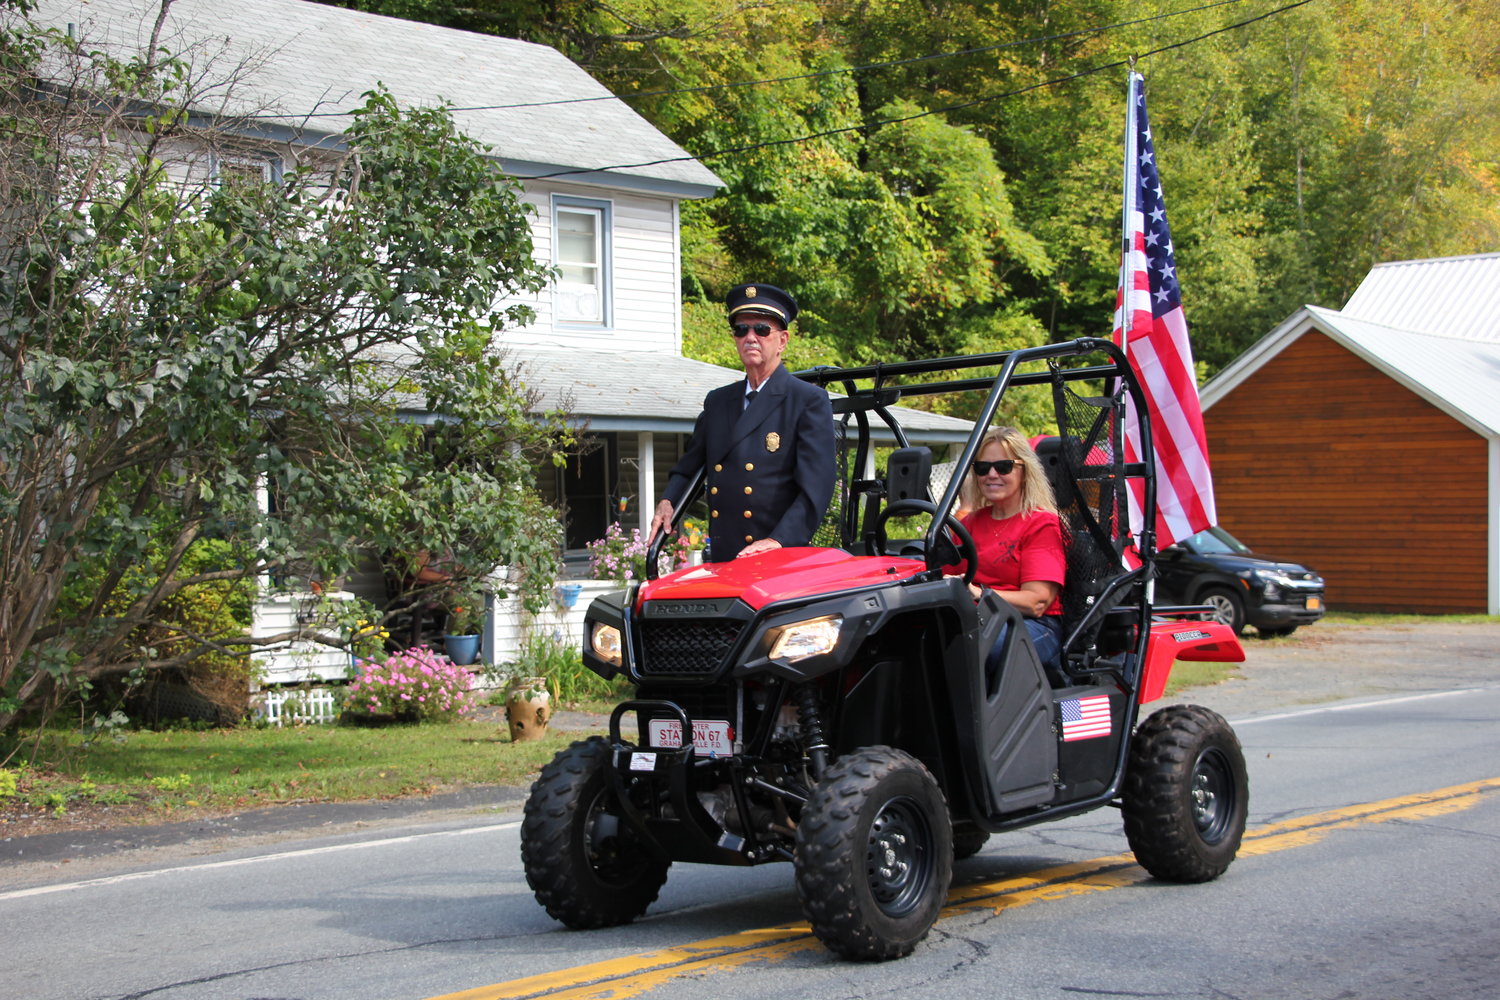 Joe Pond, Grahamsville Fire Department’s oldest member and current Treasurer was the Grand Marshal for the parade.